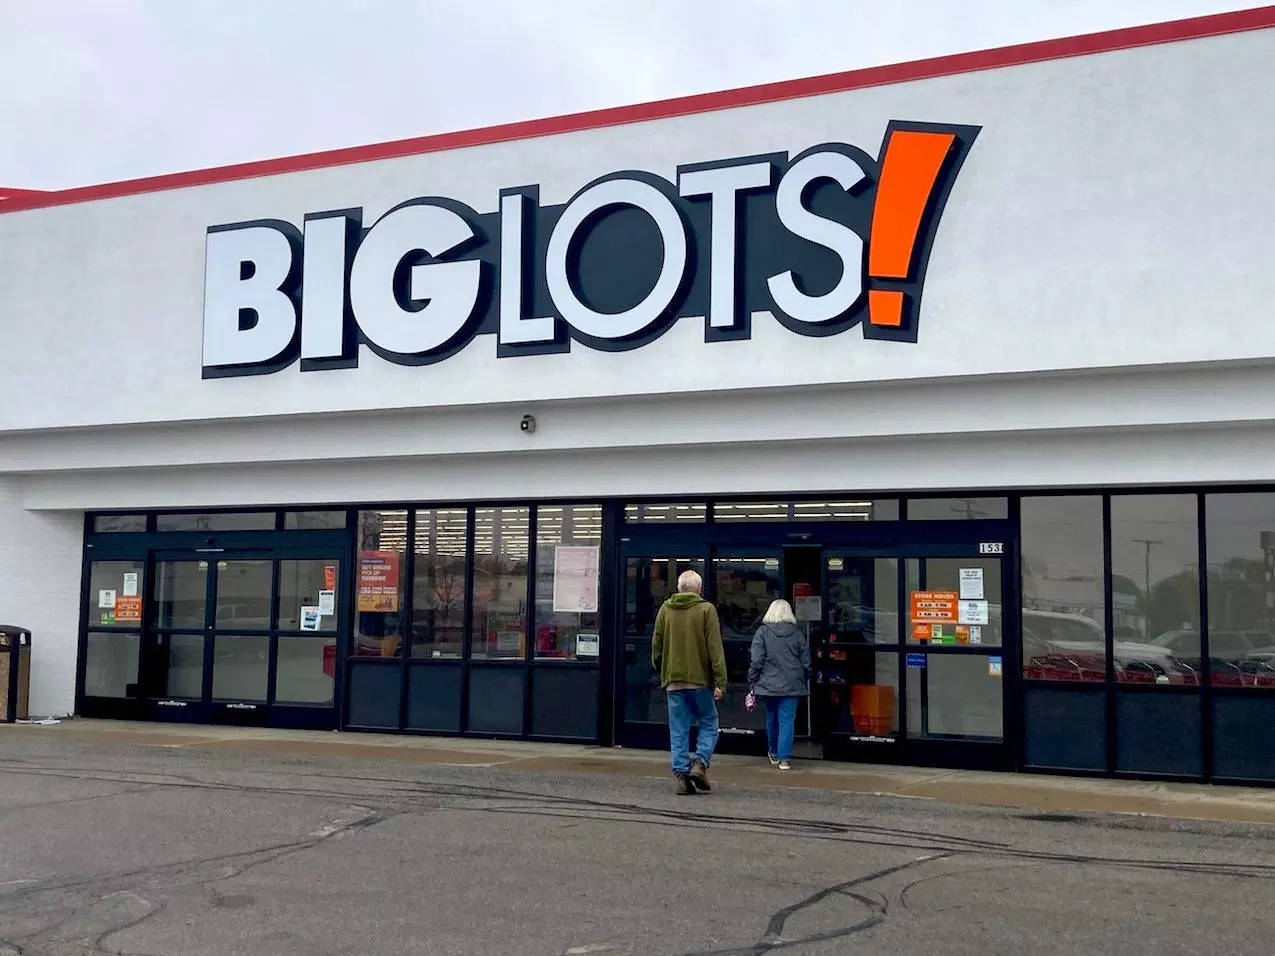 Big Lots to close its doors – The News Review